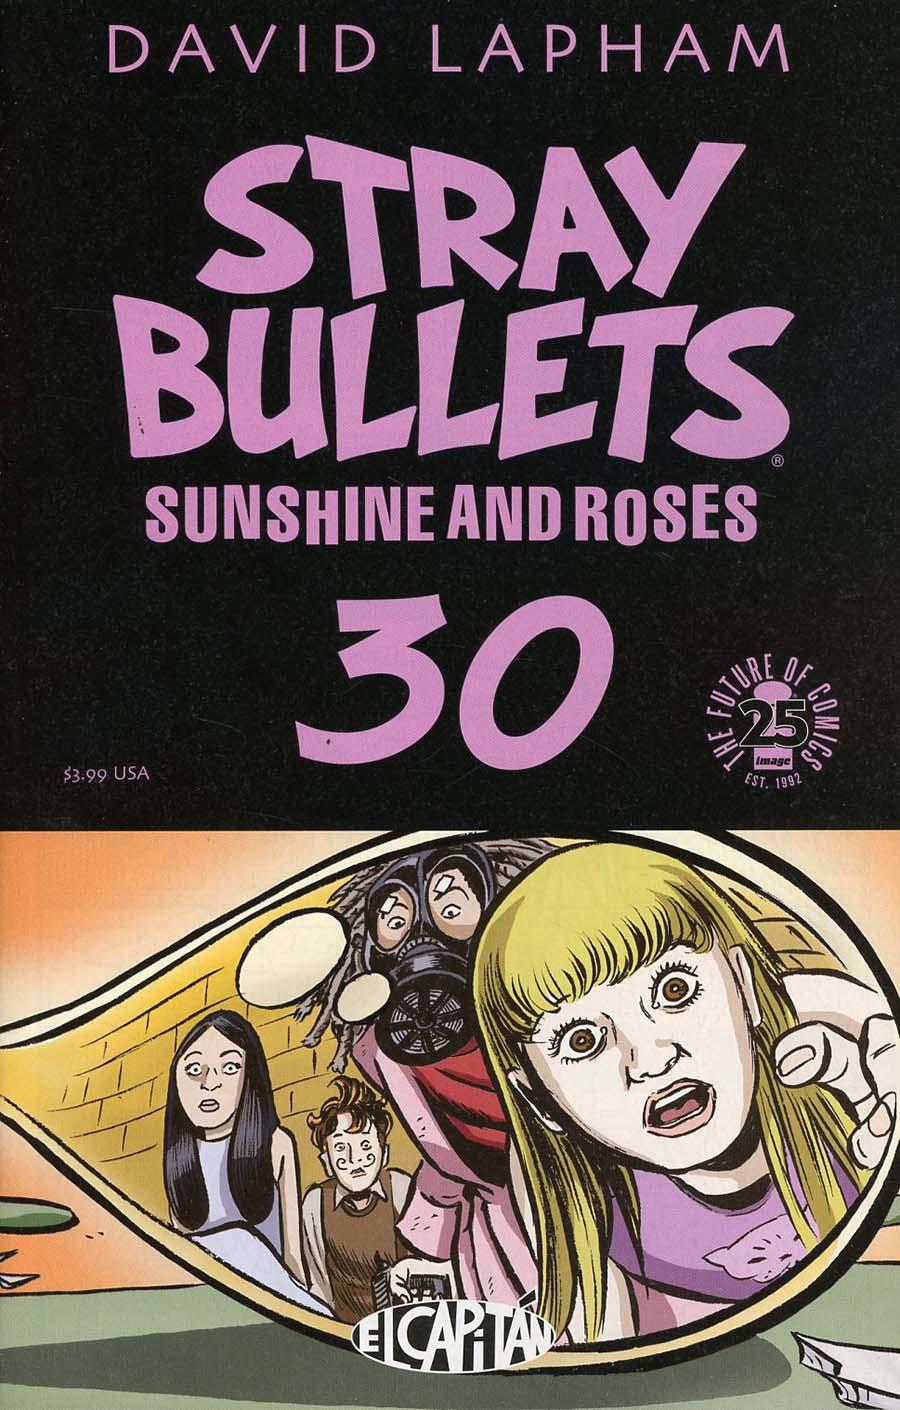 Stray Bullets Sunshine And Roses Vol. 1 #30